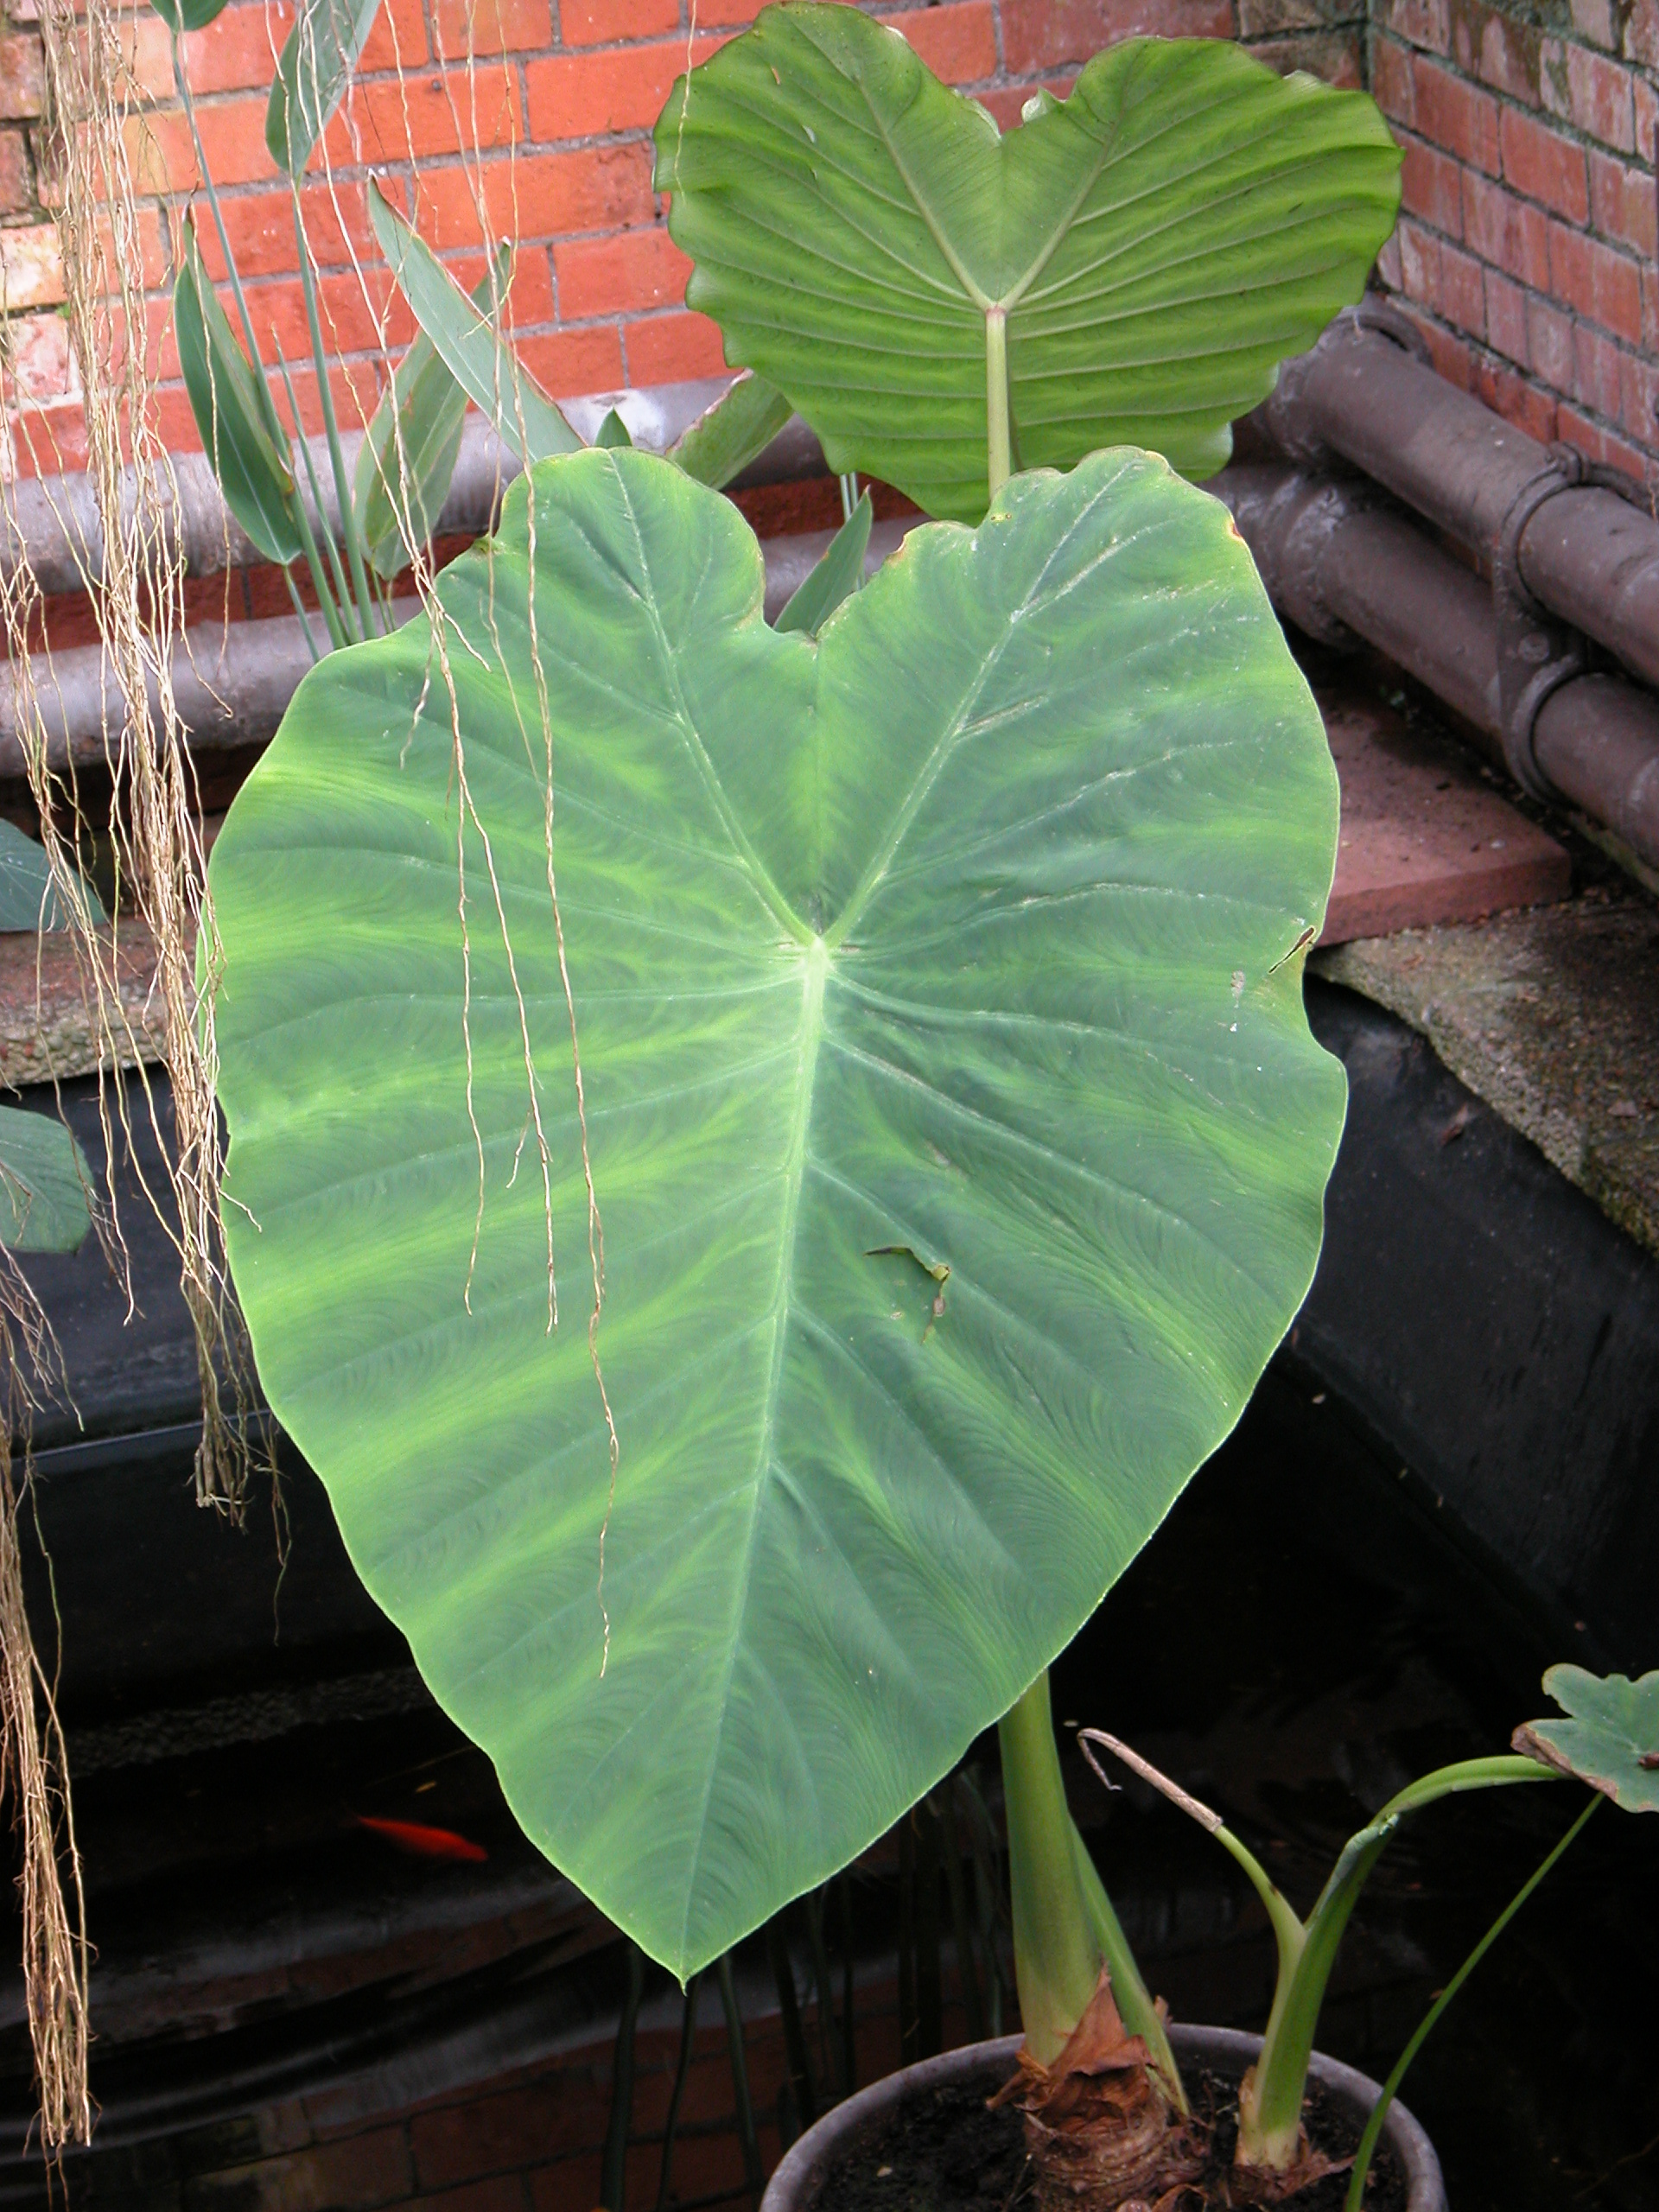 Image After Images Big Leaf Tropical Plant In Water Green